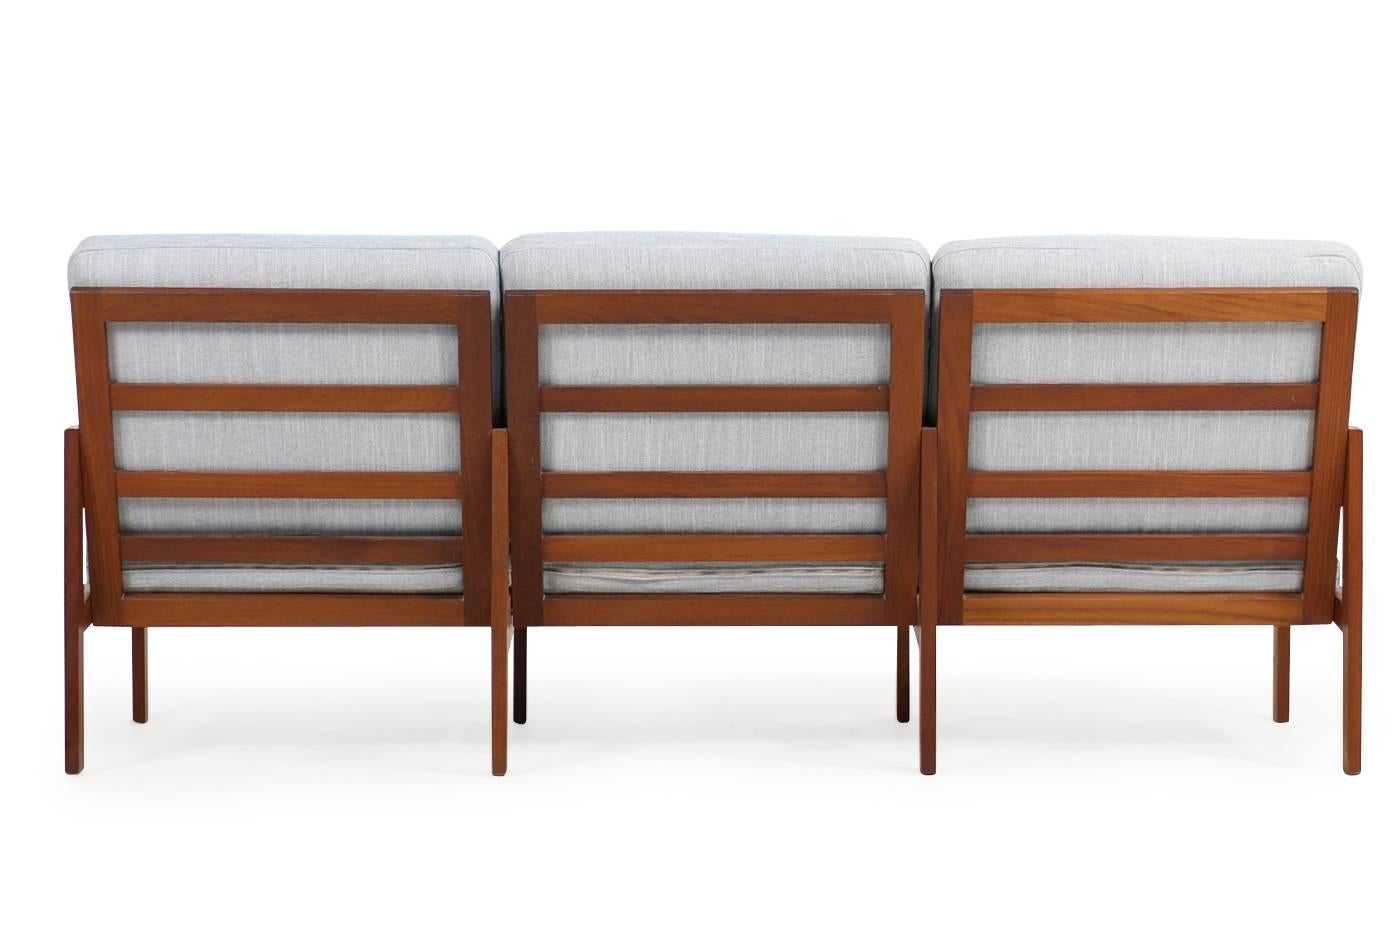 Beautiful 1960s Teak Sofa, new upholstery and covered with a beautiful light grey woven fabric.
Model Capella by Illum Wikkelsø for Niels Eilersen, Denmark. Solid teakwood base also in a very good condition, we have a pair of matching chairs